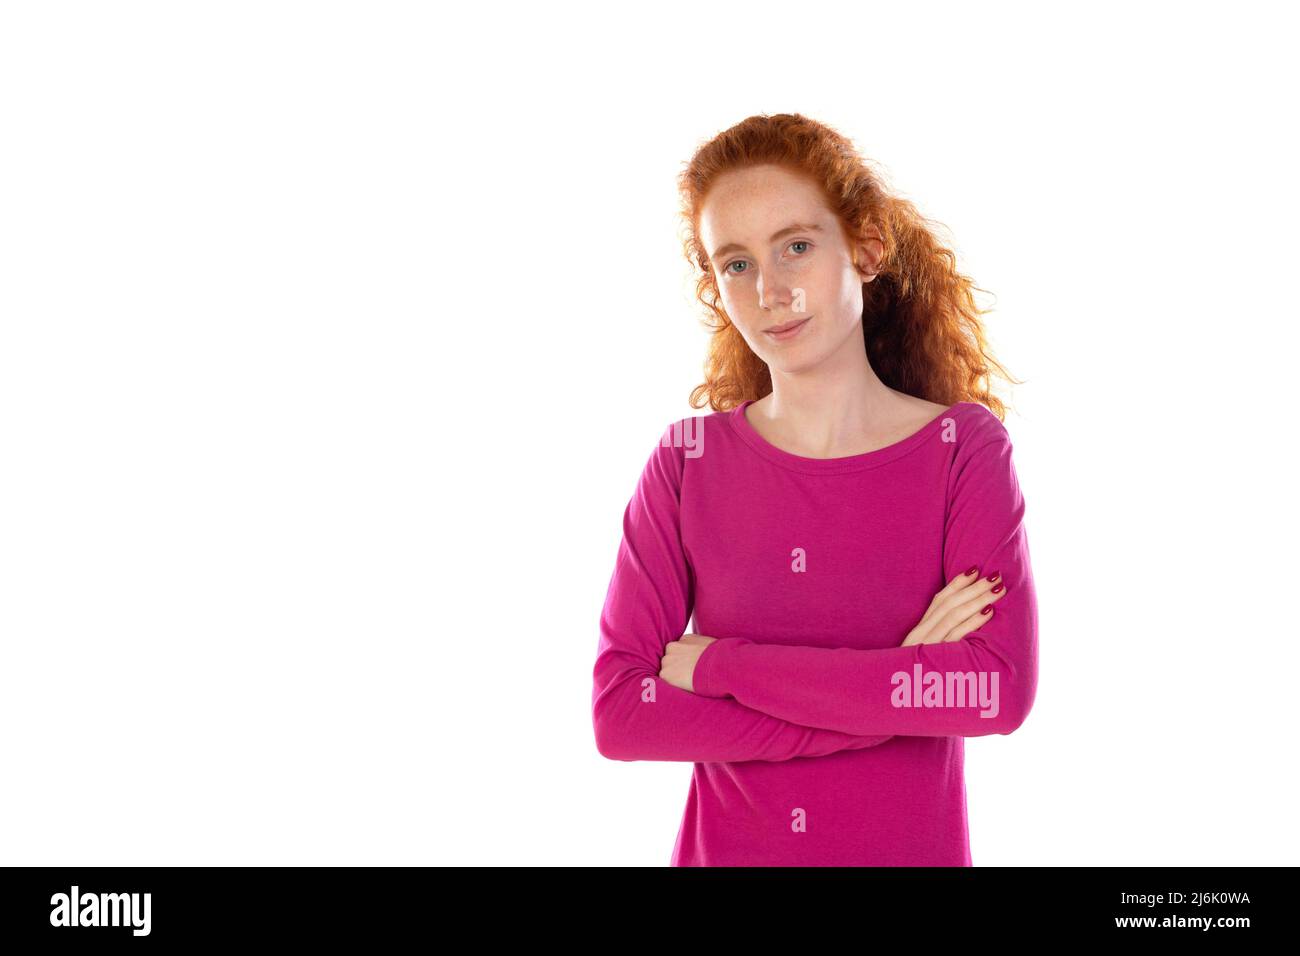 Redhaired young woman wearing a pink t-shirt isolated on a white background Stock Photo